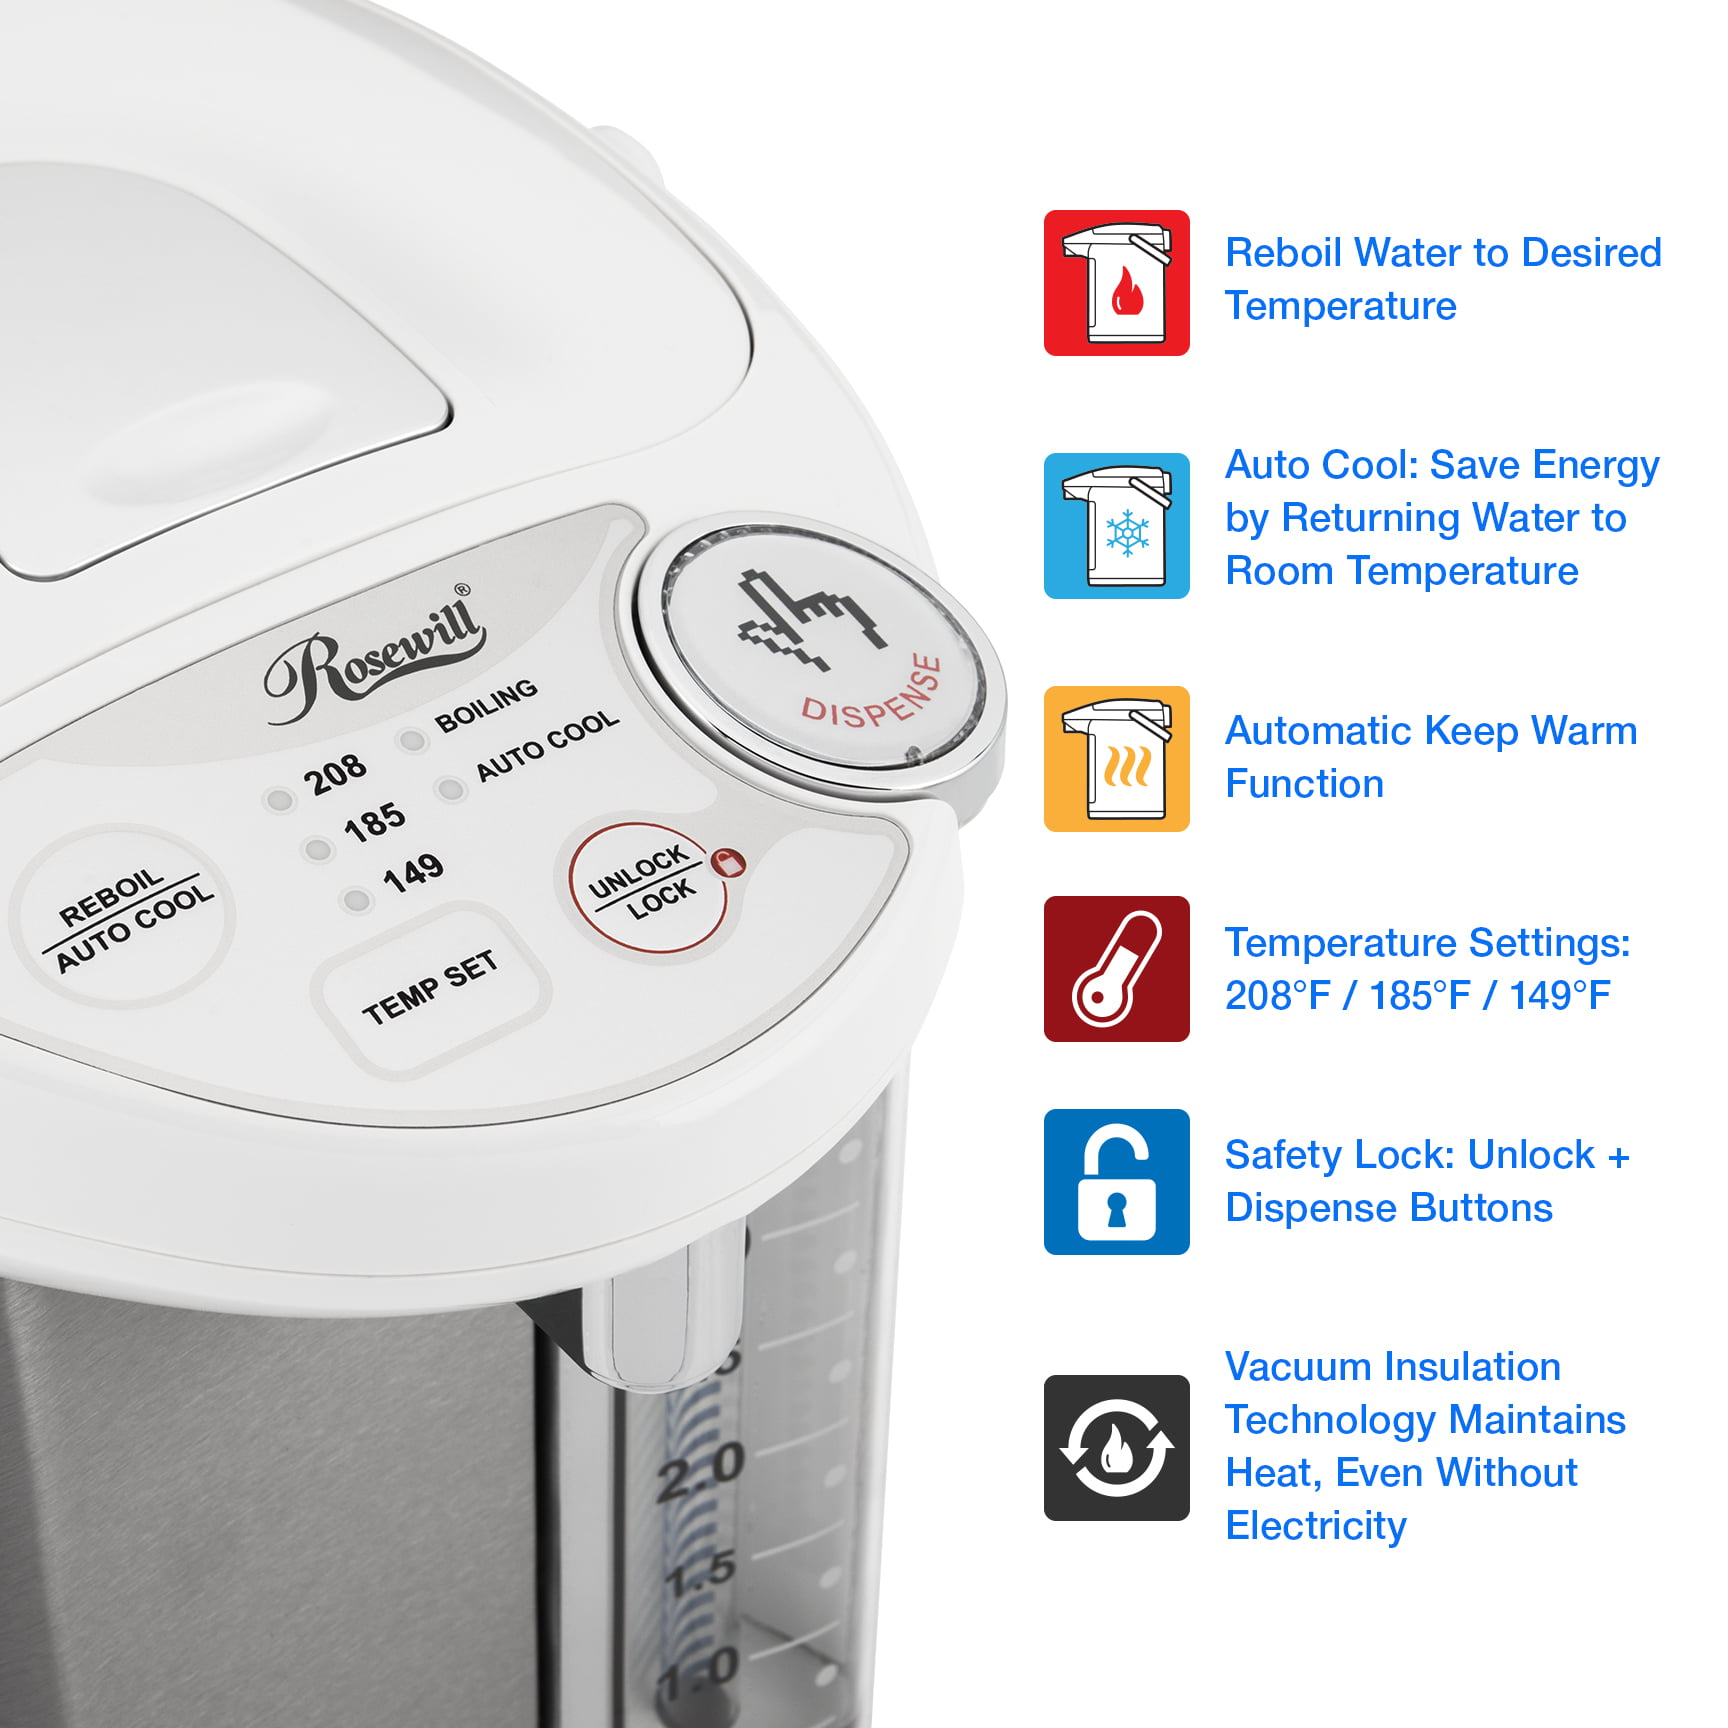 NeweggBusiness - Rosewill Electric Hot Water Boiler and Warmer